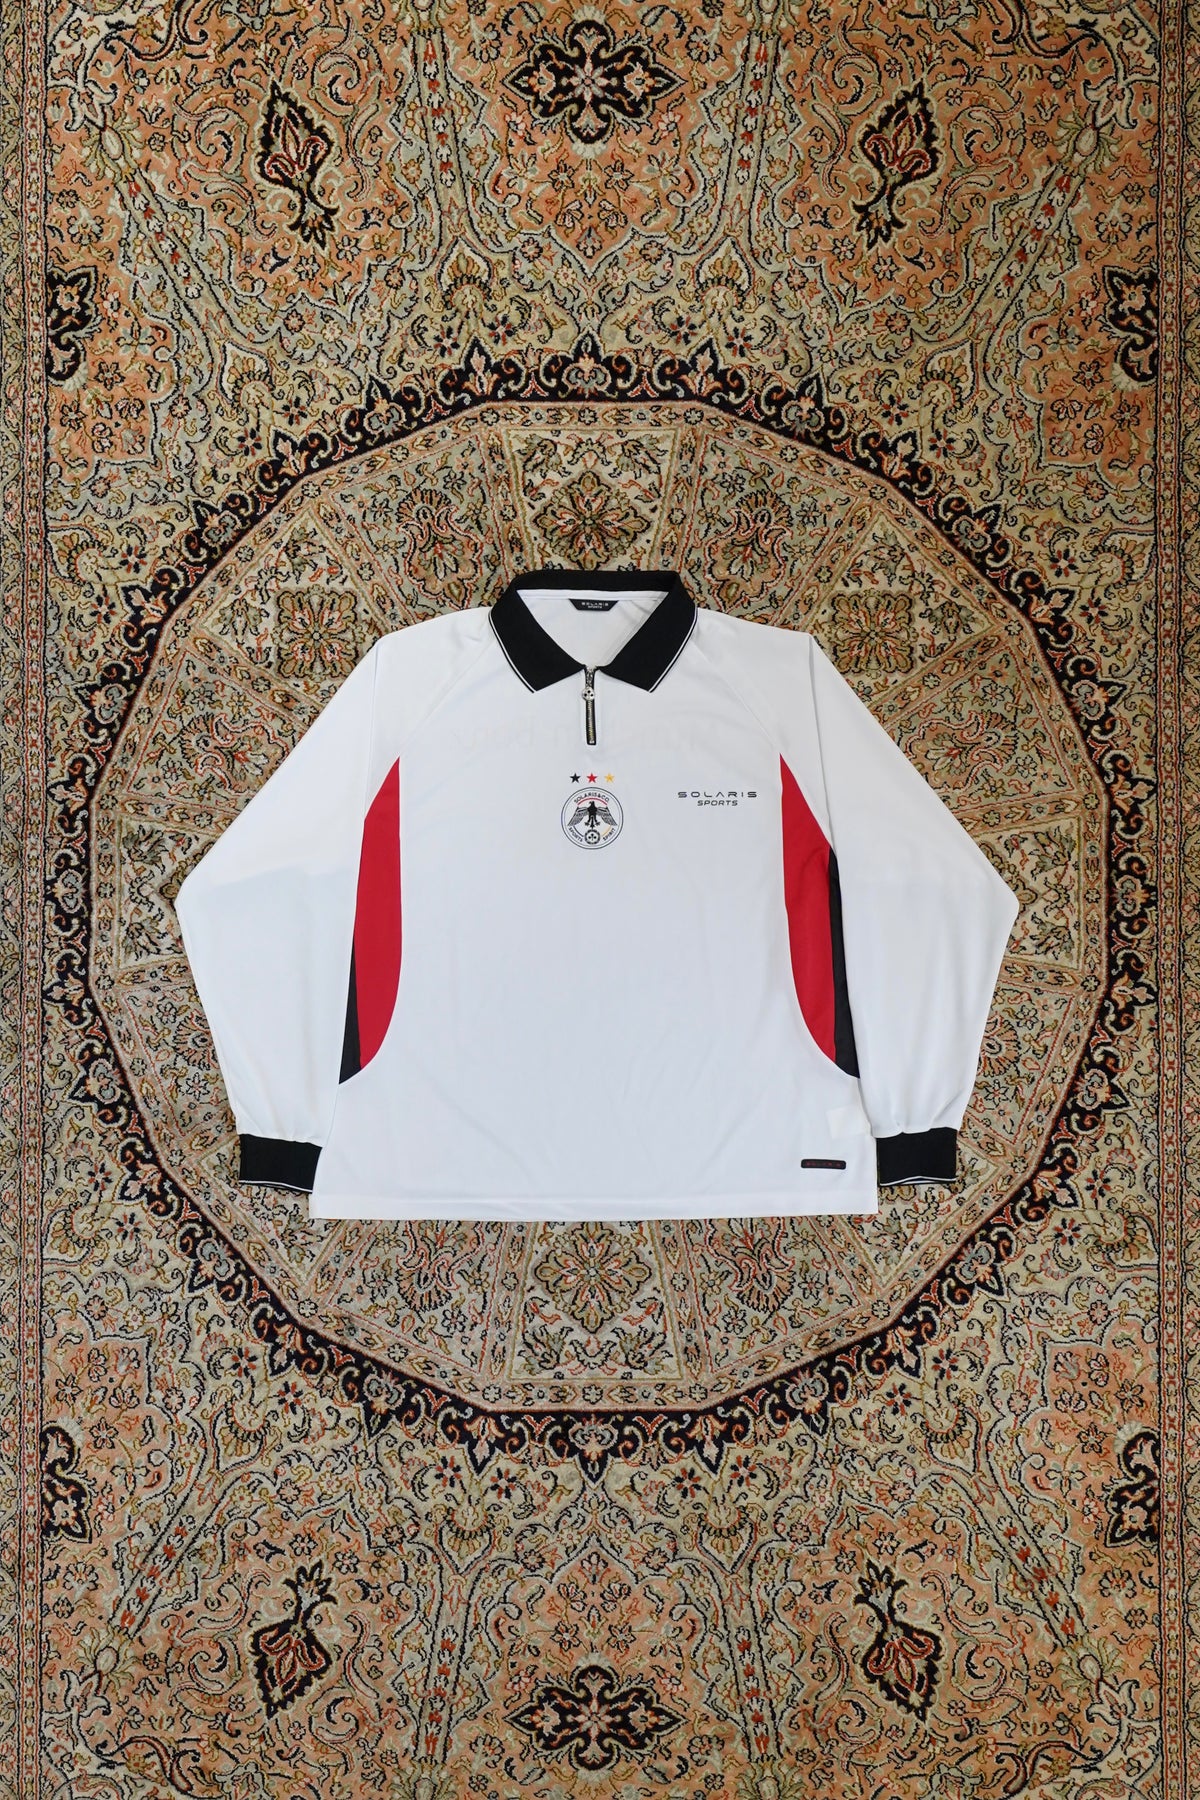 SOLARIS & CO. L/S Football Shirt (WHITE) (Tops) mail order